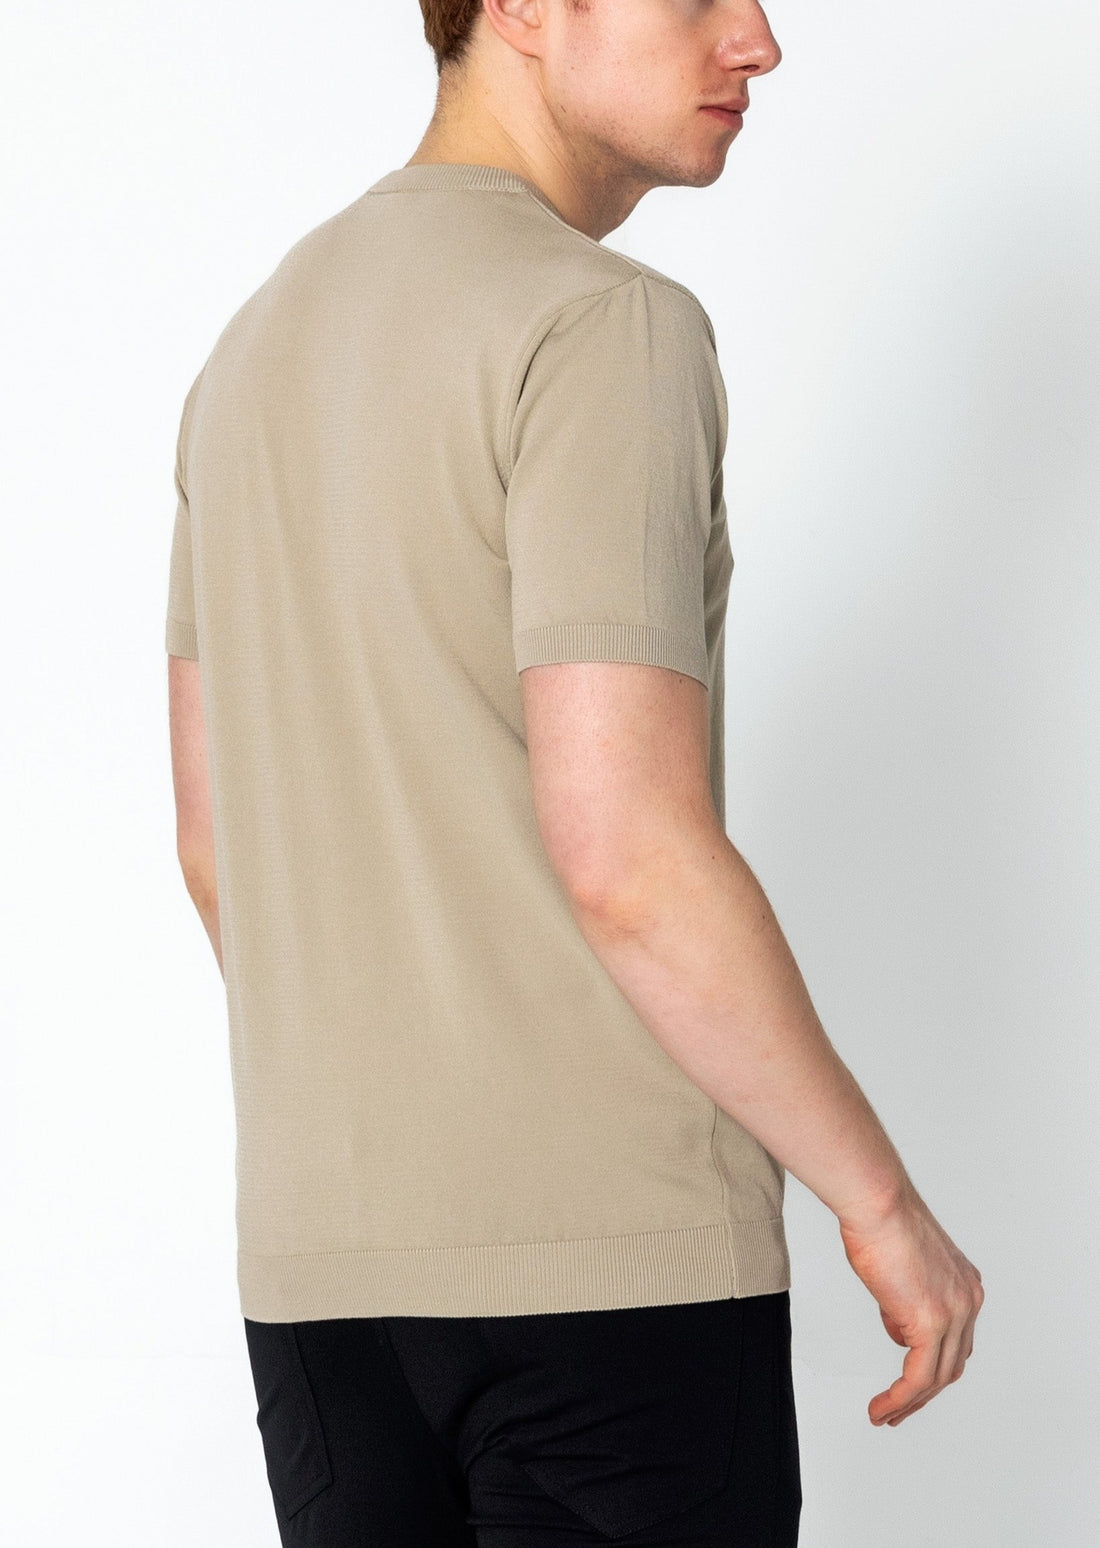 Ribbed Crew-neck Fitted T-shirt - Dark Beige